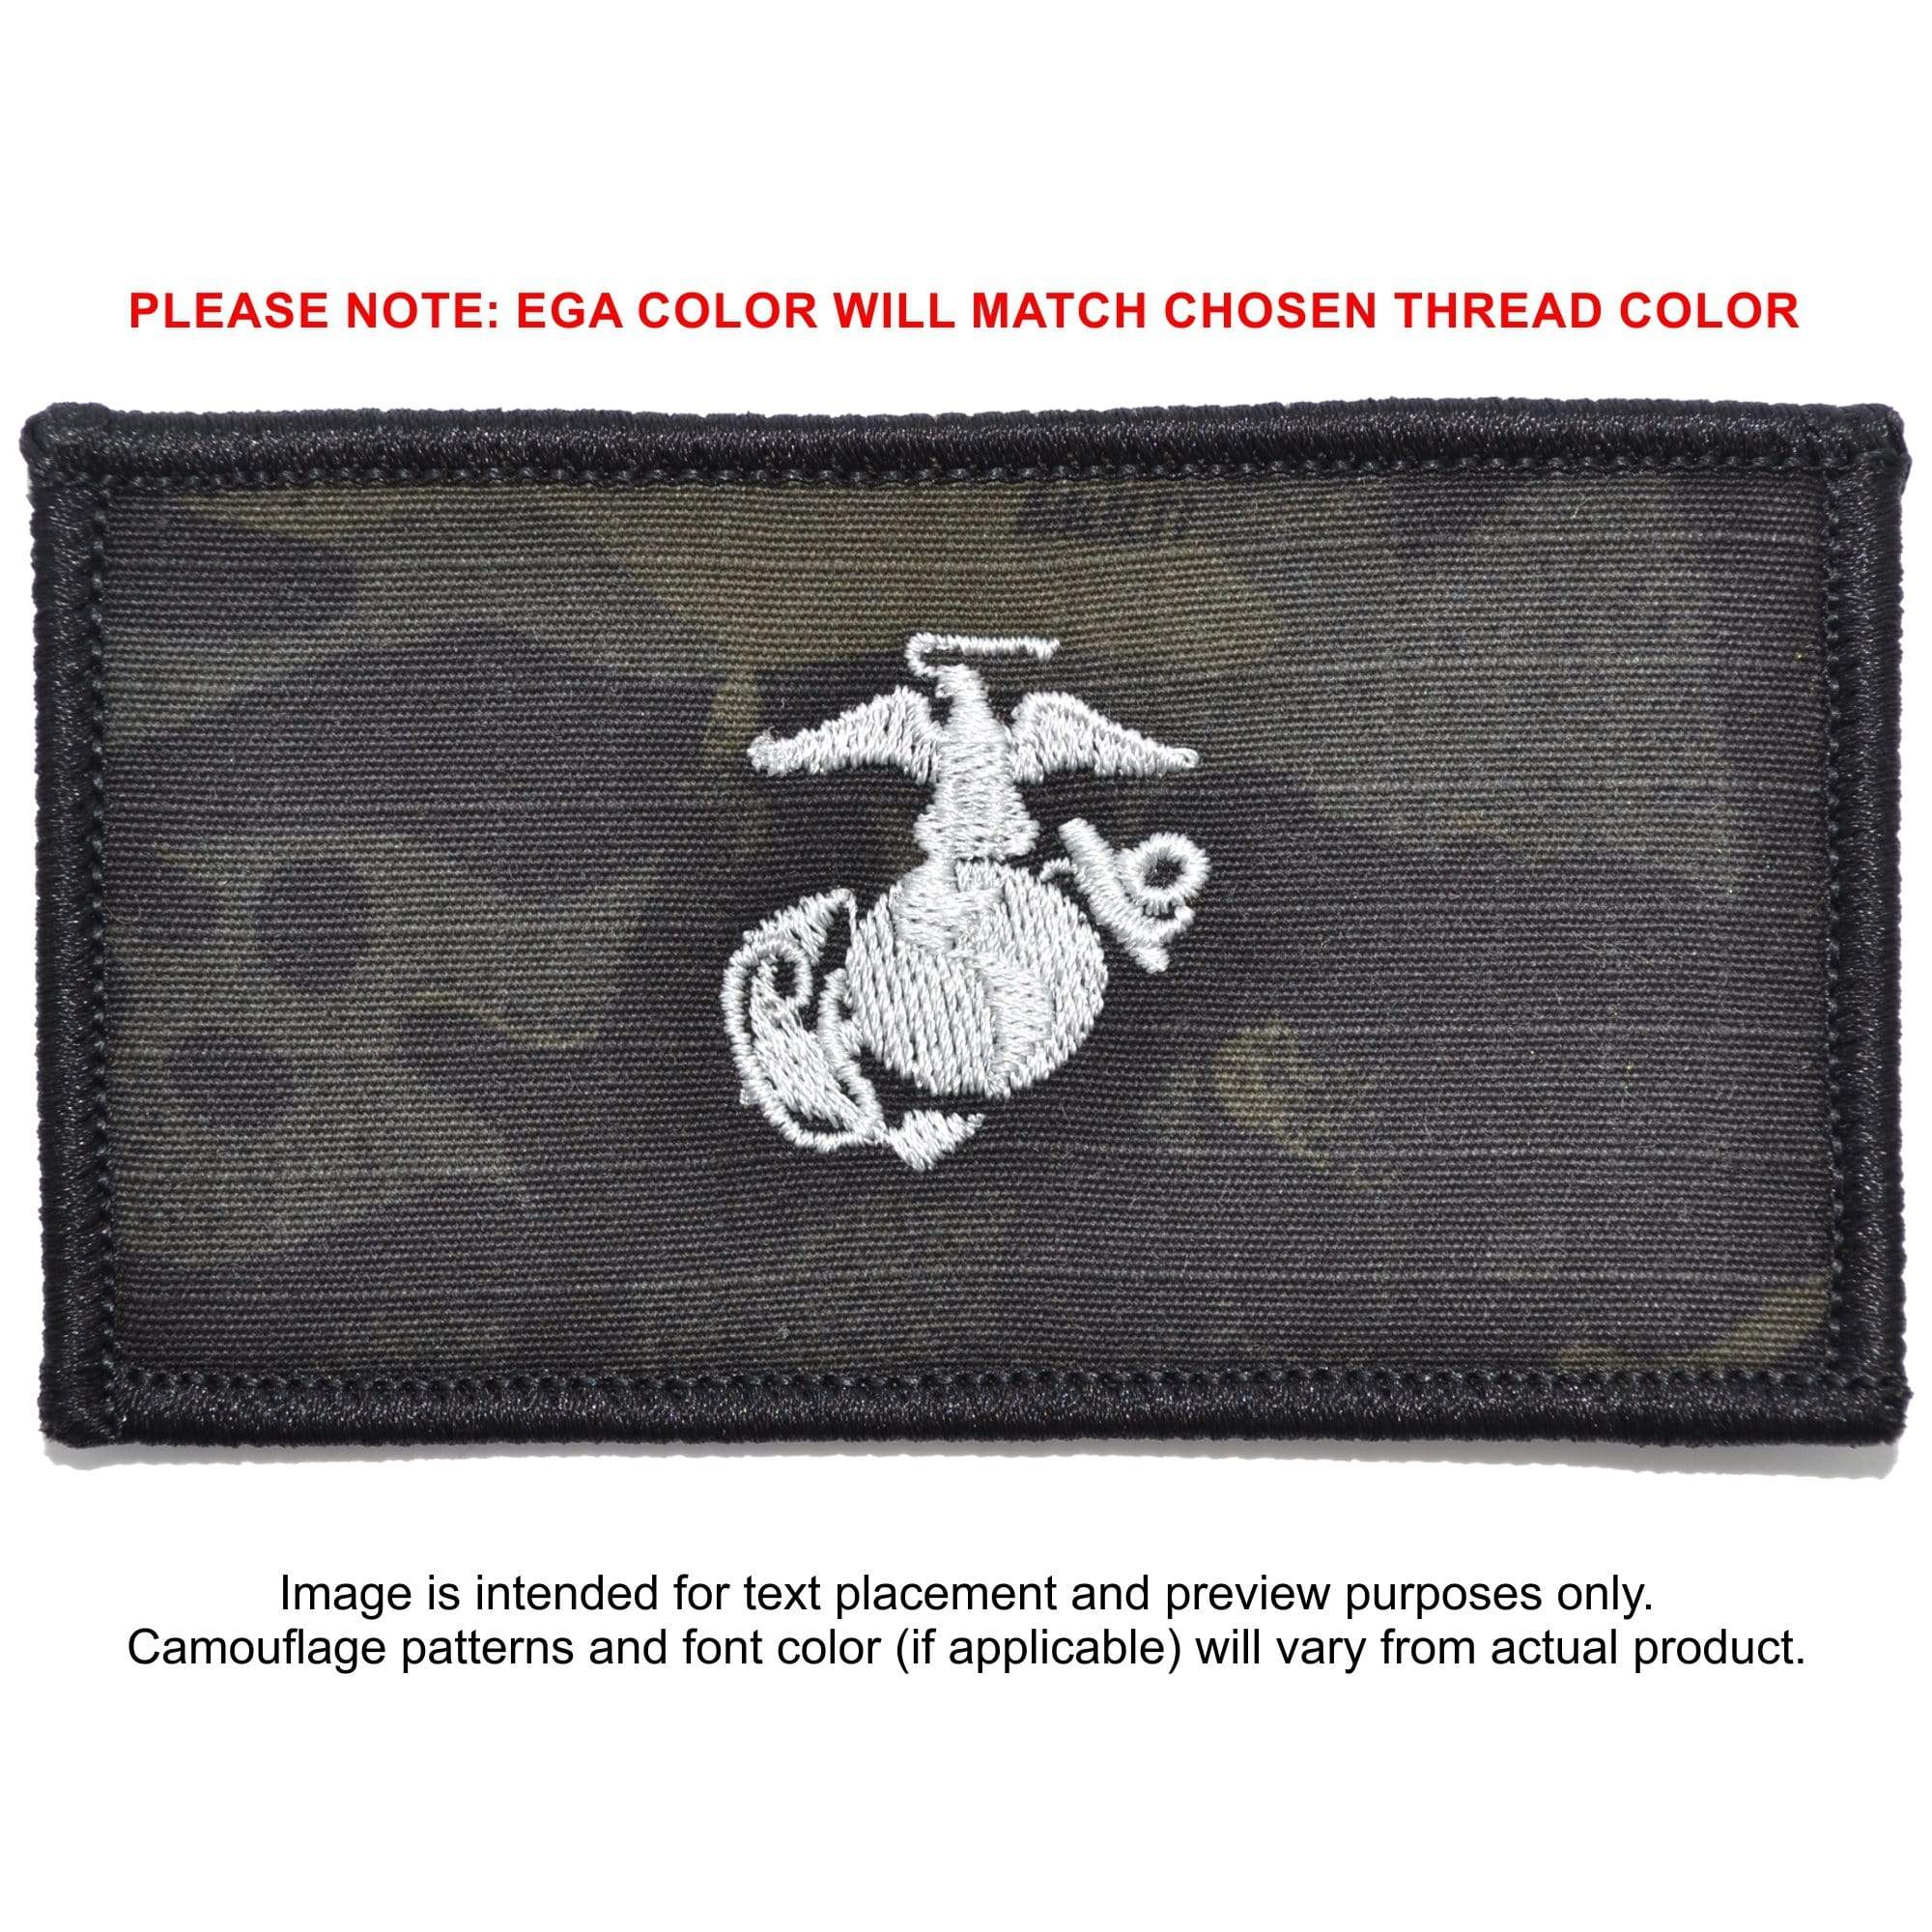 Tactical Gear Junkie Patches MultiCam BLACK USMC Plate Carrier Flak Patch - Eagle Globe and Anchor Graphic (Filled Globe)